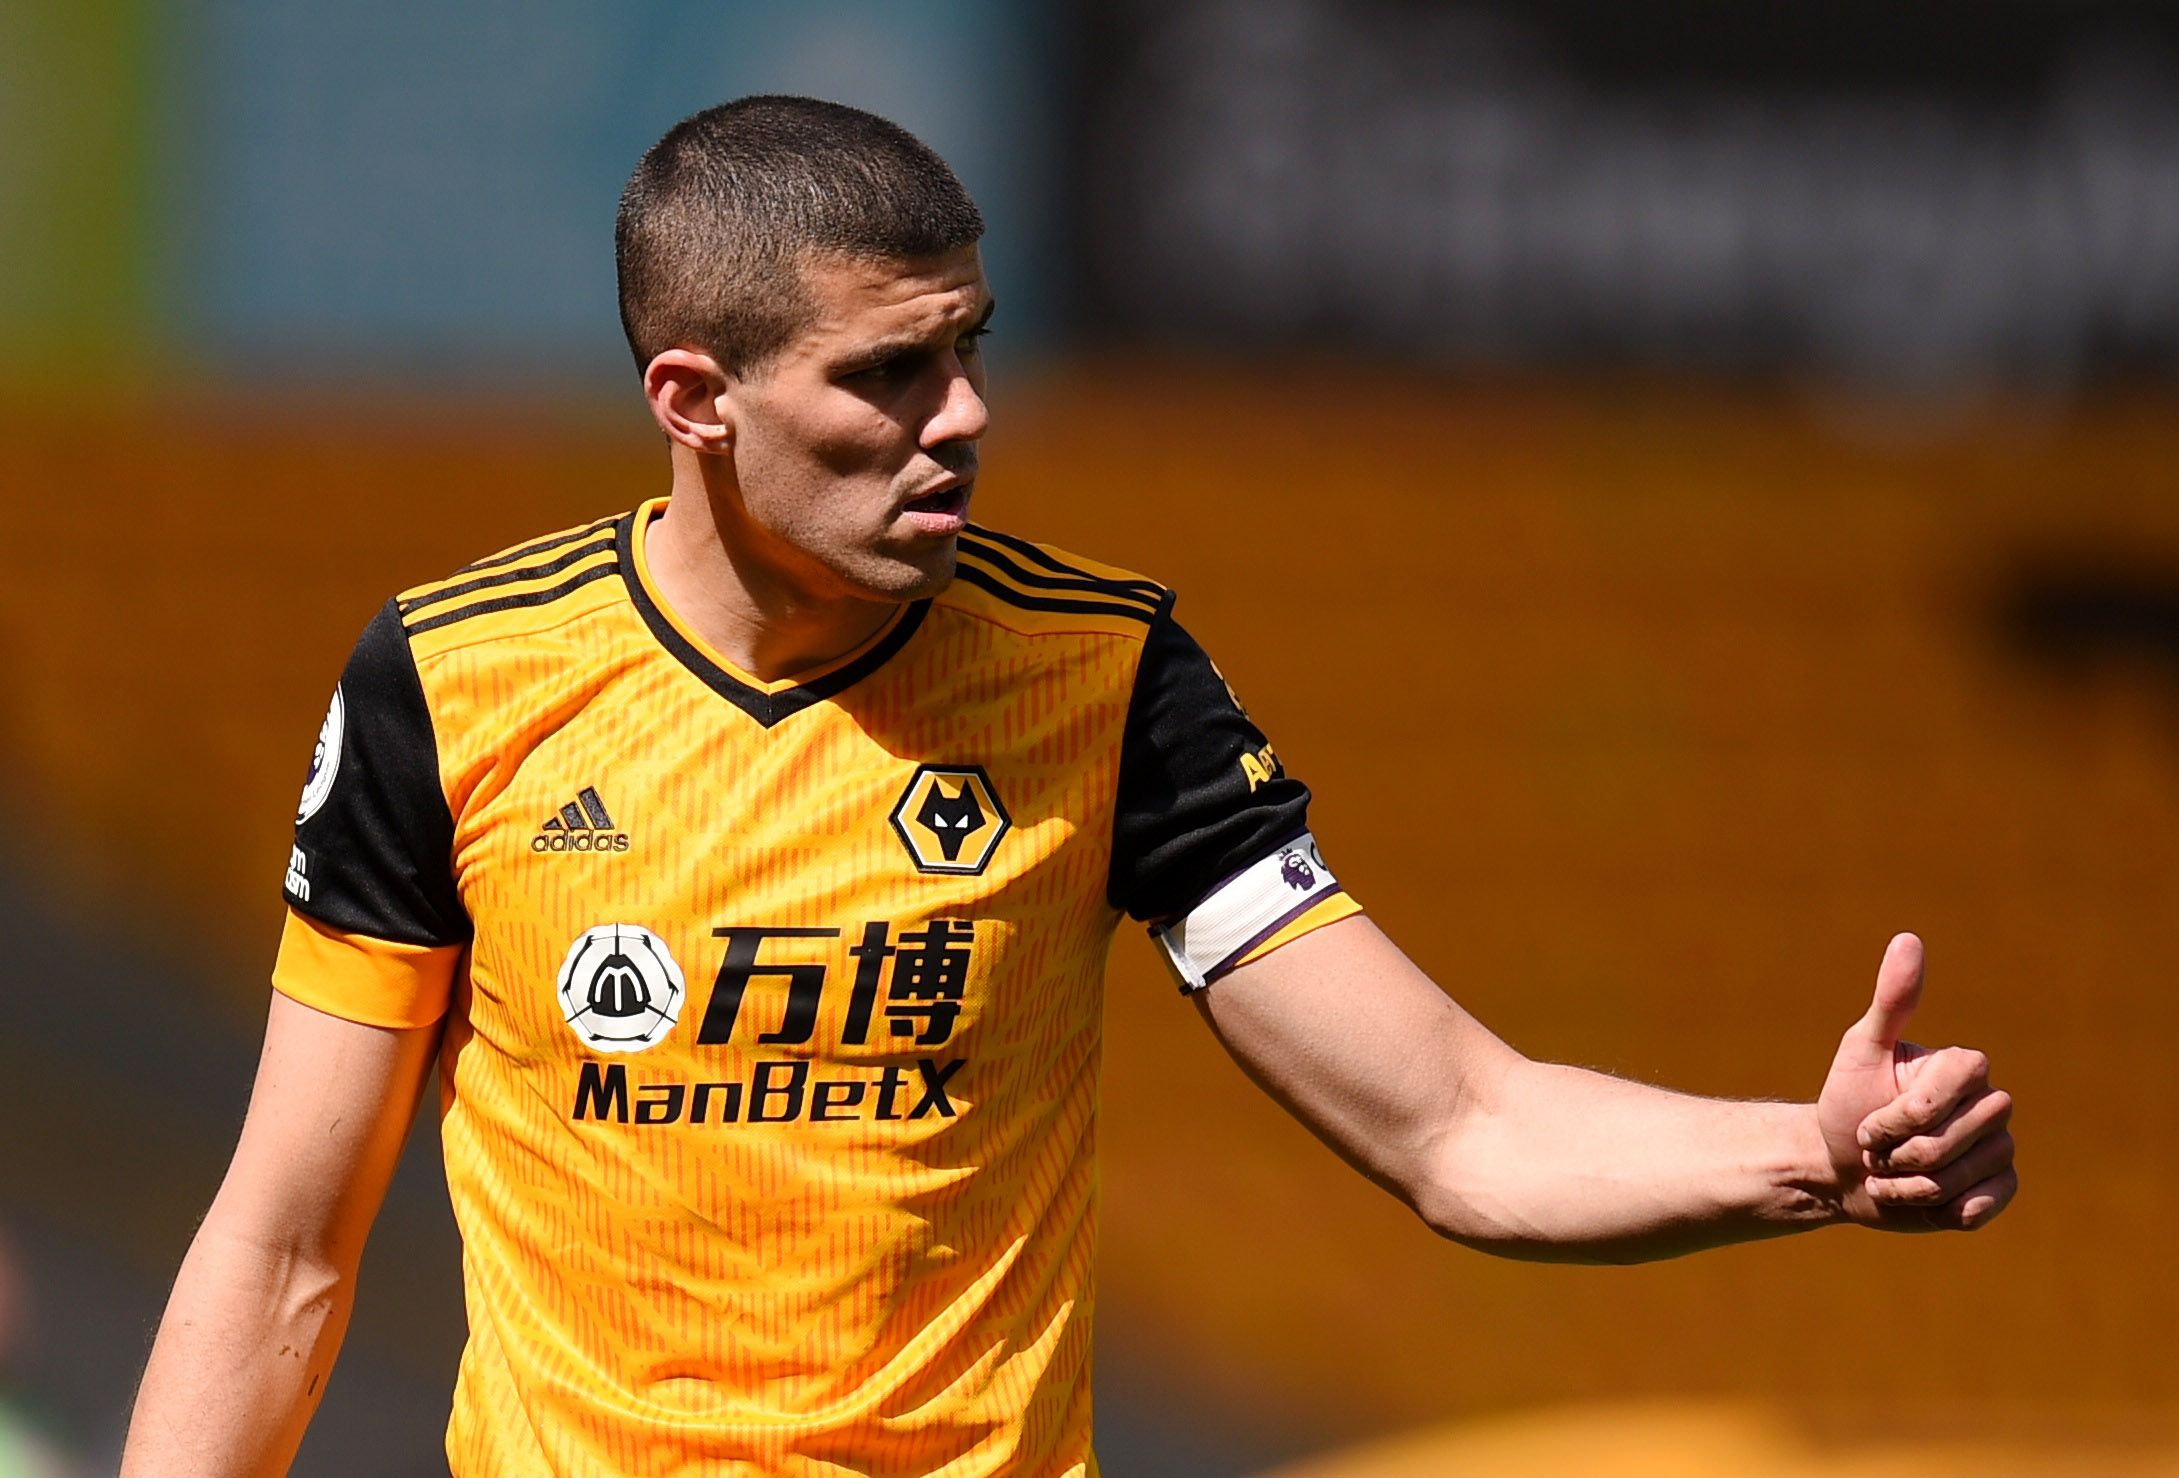 Soccer Football - Premier League - Wolverhampton Wanderers v Burnley - Molineux Stadium, Wolverhampton, Britain - April 25, 2021 Wolverhampton Wanderers' Conor Coady reacts Pool via REUTERS/Oli Scarff EDITORIAL USE ONLY. No use with unauthorized audio, video, data, fixture lists, club/league logos or 'live' services. Online in-match use limited to 75 images, no video emulation. No use in betting, games or single club /league/player publications.  Please contact your account representative for fu